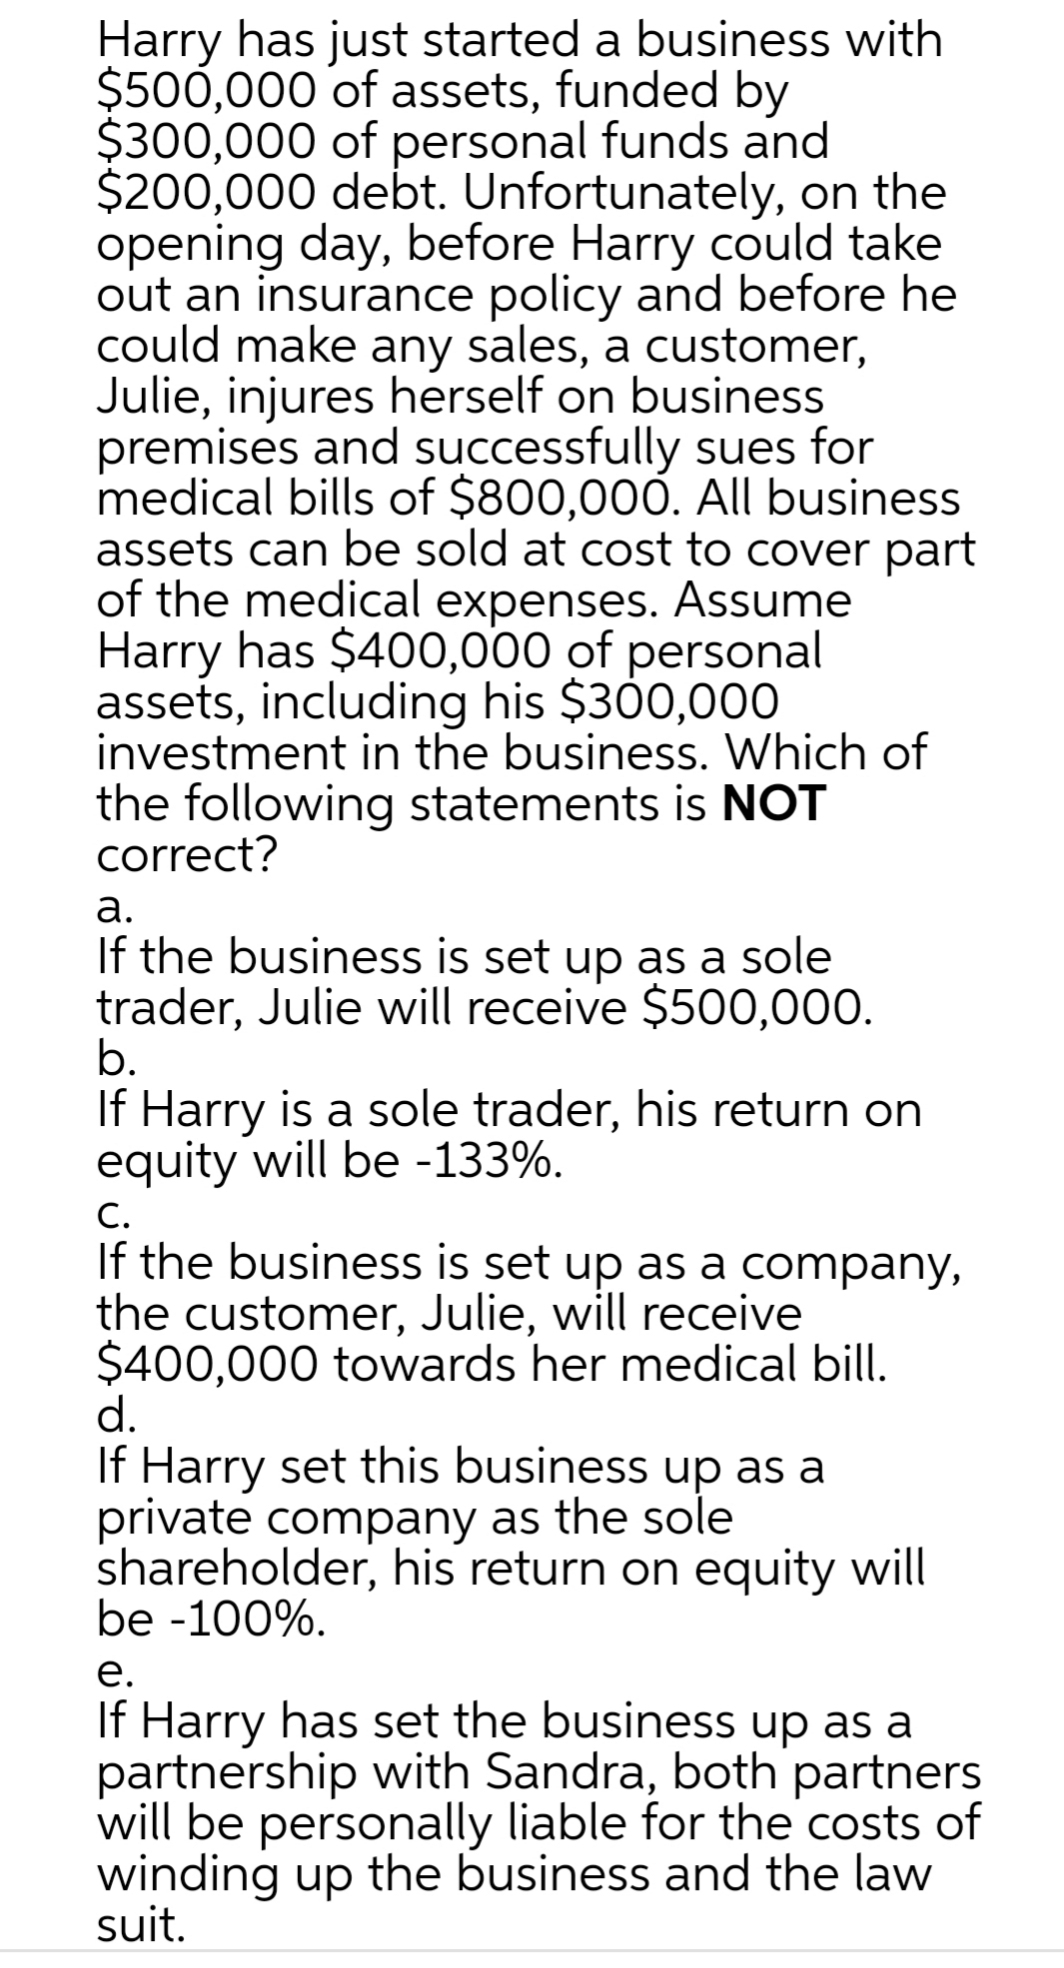 Harry has just started a business with
$500,000 of assets, funded by
$300,000 of personal funds and
$200,000 debt. Unfortunately, on the
opening day, before Harry could take
out an insurance policy and before he
could make any sales, a customer,
Julie, injures herself on business
premises and successfully sues for
medical bills of $800,000. All business
assets can be sold at cost to cover part
of the medical expenses. Assume
Harry has $400,000 of personal
assets, including his $300,000
investment in the business. Which of
the following statements is NOT
correct?
а.
If the business is set up as a sole
trader, Julie will receive $500,000.
b.
If Harry is a sole trader, his return on
equity will be -133%.
C.
If the business is set up as a company,
the customer, Julie, will receive
$400,000 towards her medical bill.
d.
If Harry set this business up as a
private company as the sole
shareholder, his return on equity will
be -100%.
е.
If Harry has set the business up as a
partnership with Sandra, both partners
will be personally liable for the costs of
winding up the business and the law
suit.
